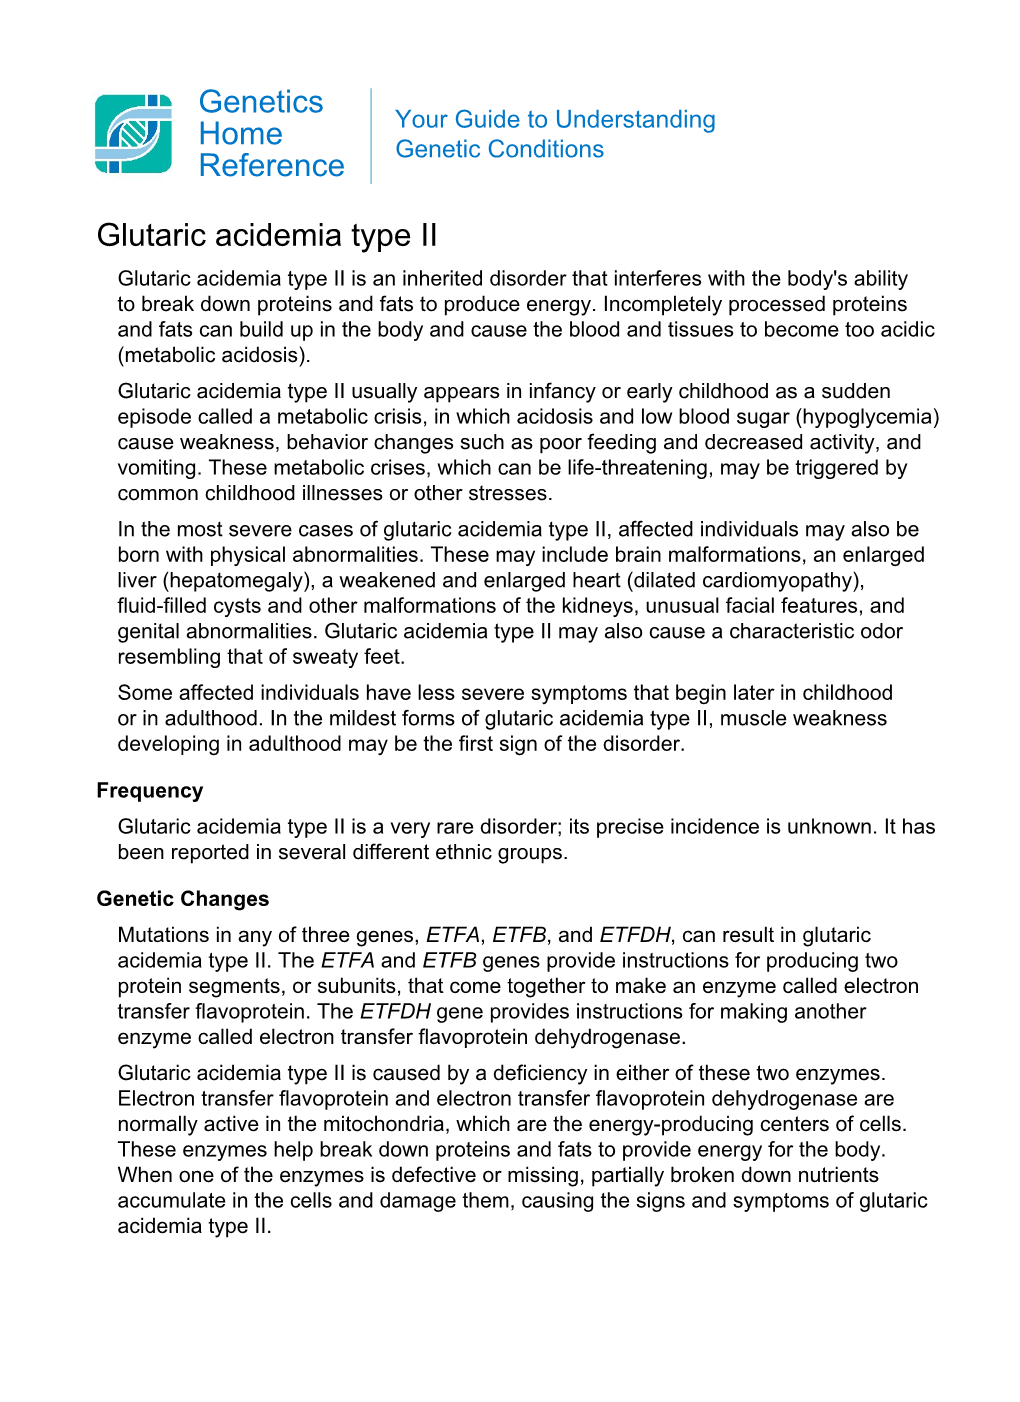 Glutaric Acidemia Type II Glutaric Acidemia Type II Is an Inherited Disorder That Interferes with the Body's Ability to Break Down Proteins and Fats to Produce Energy